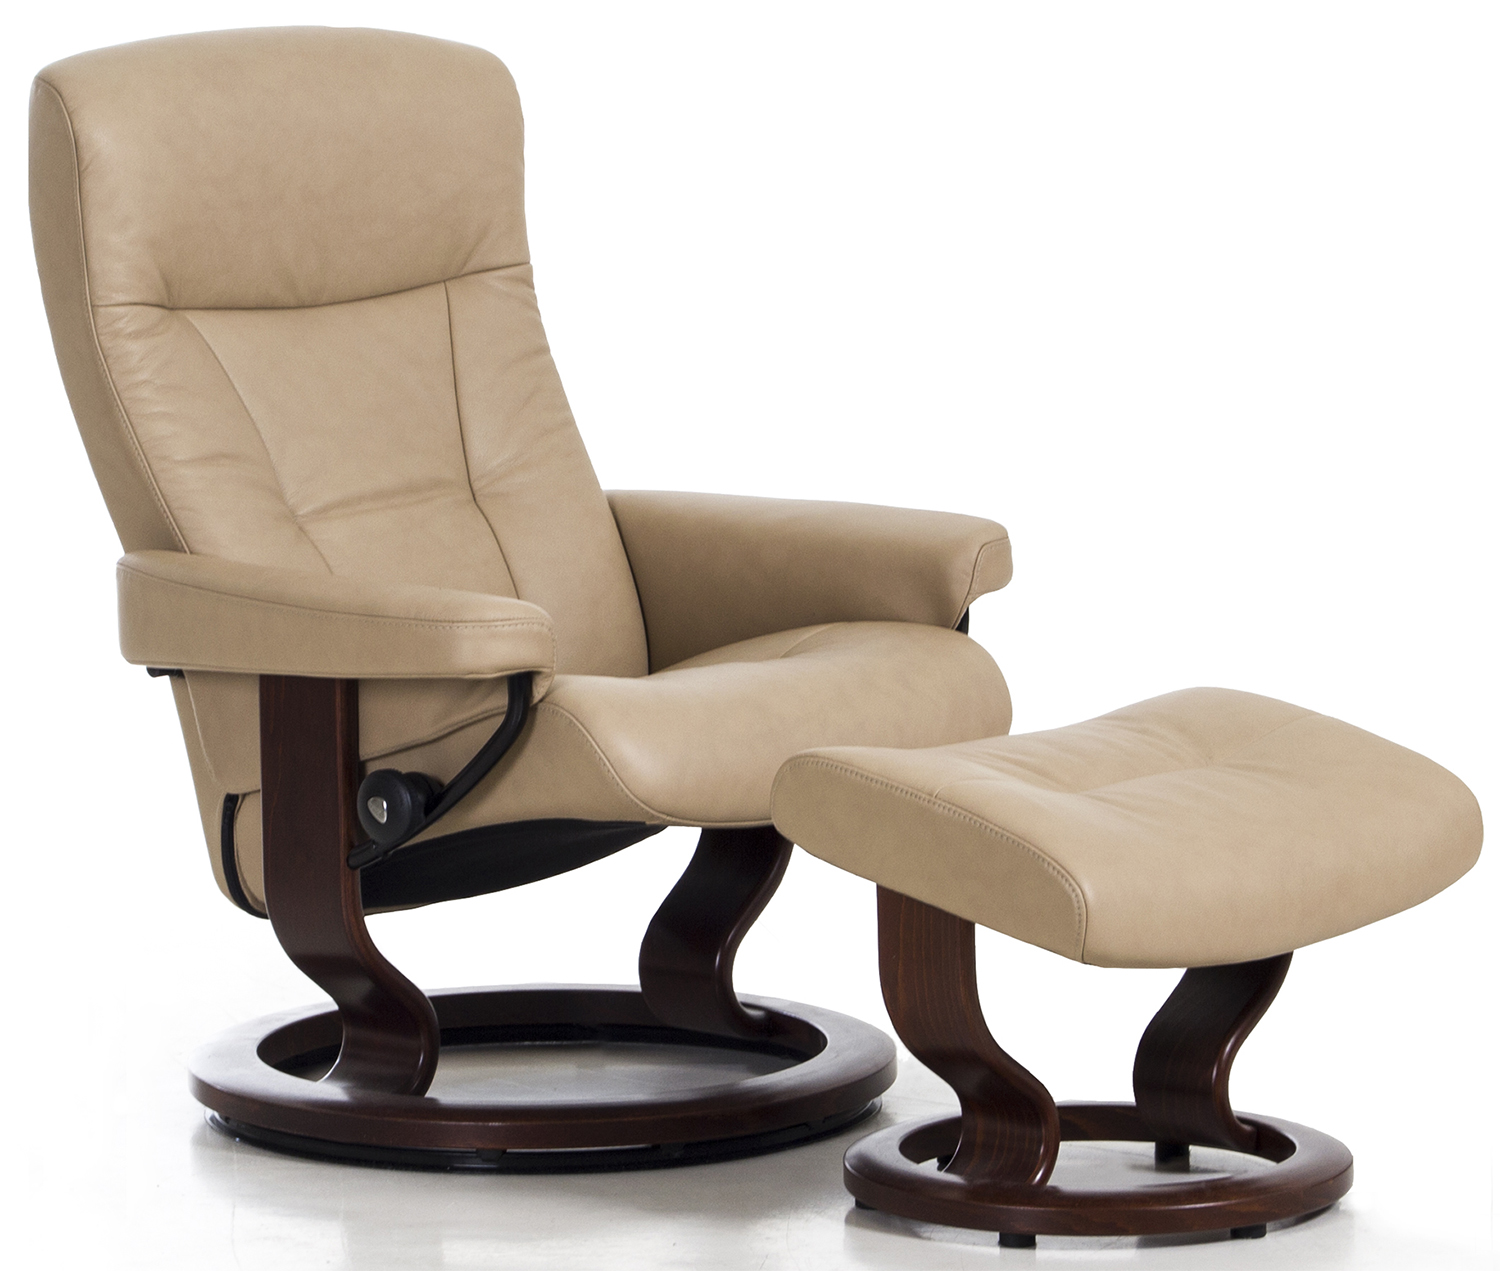 Swedish Recliner Chair Off 72, Swedish Leather Recliner Chairs